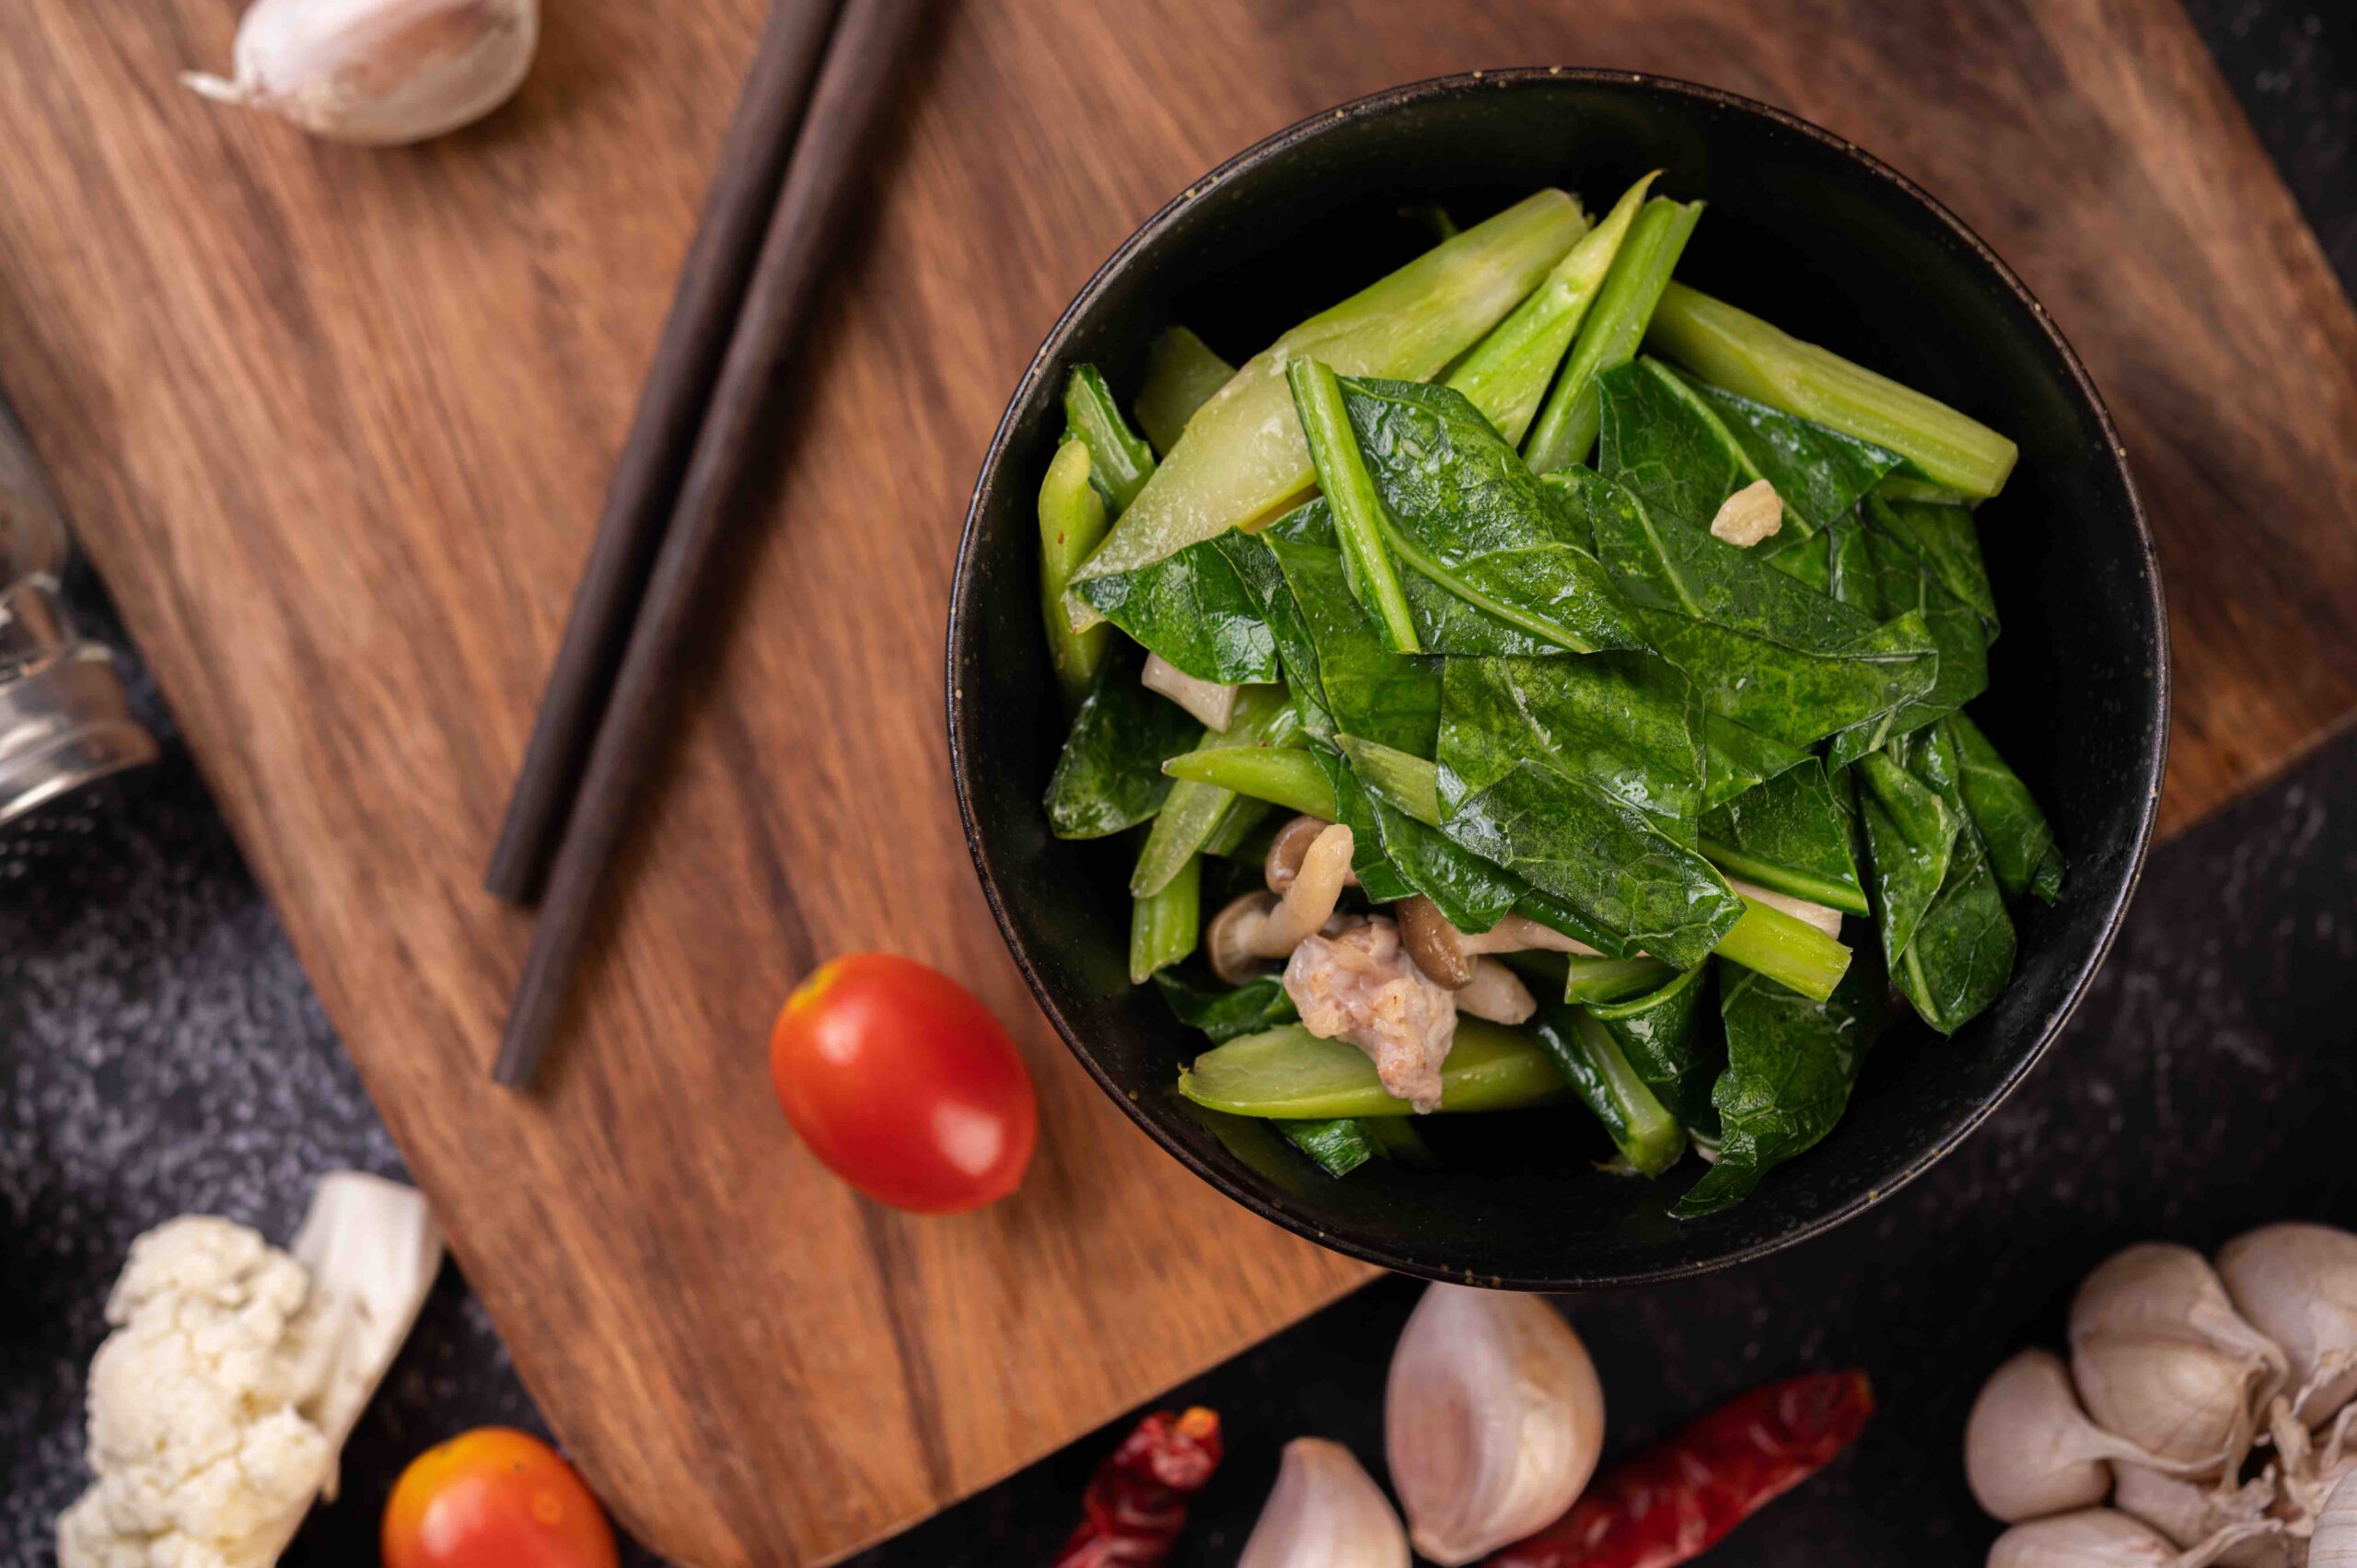 Leafy greens are good sources of magnesium 